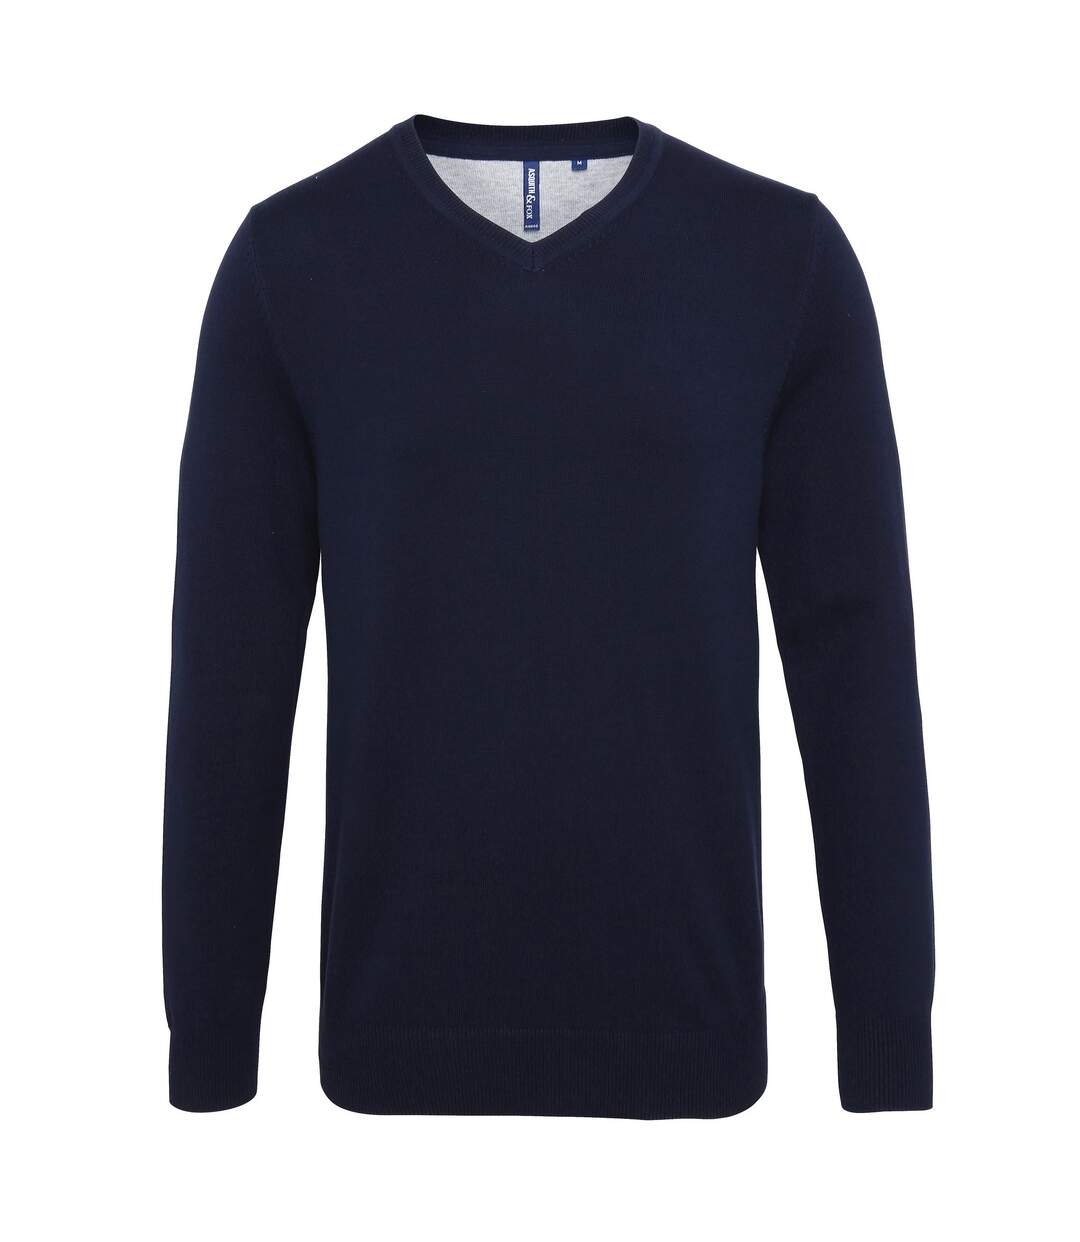 Asquith & Fox Mens Cotton Rich V-Neck Sweater (French Navy) - UTRW5188